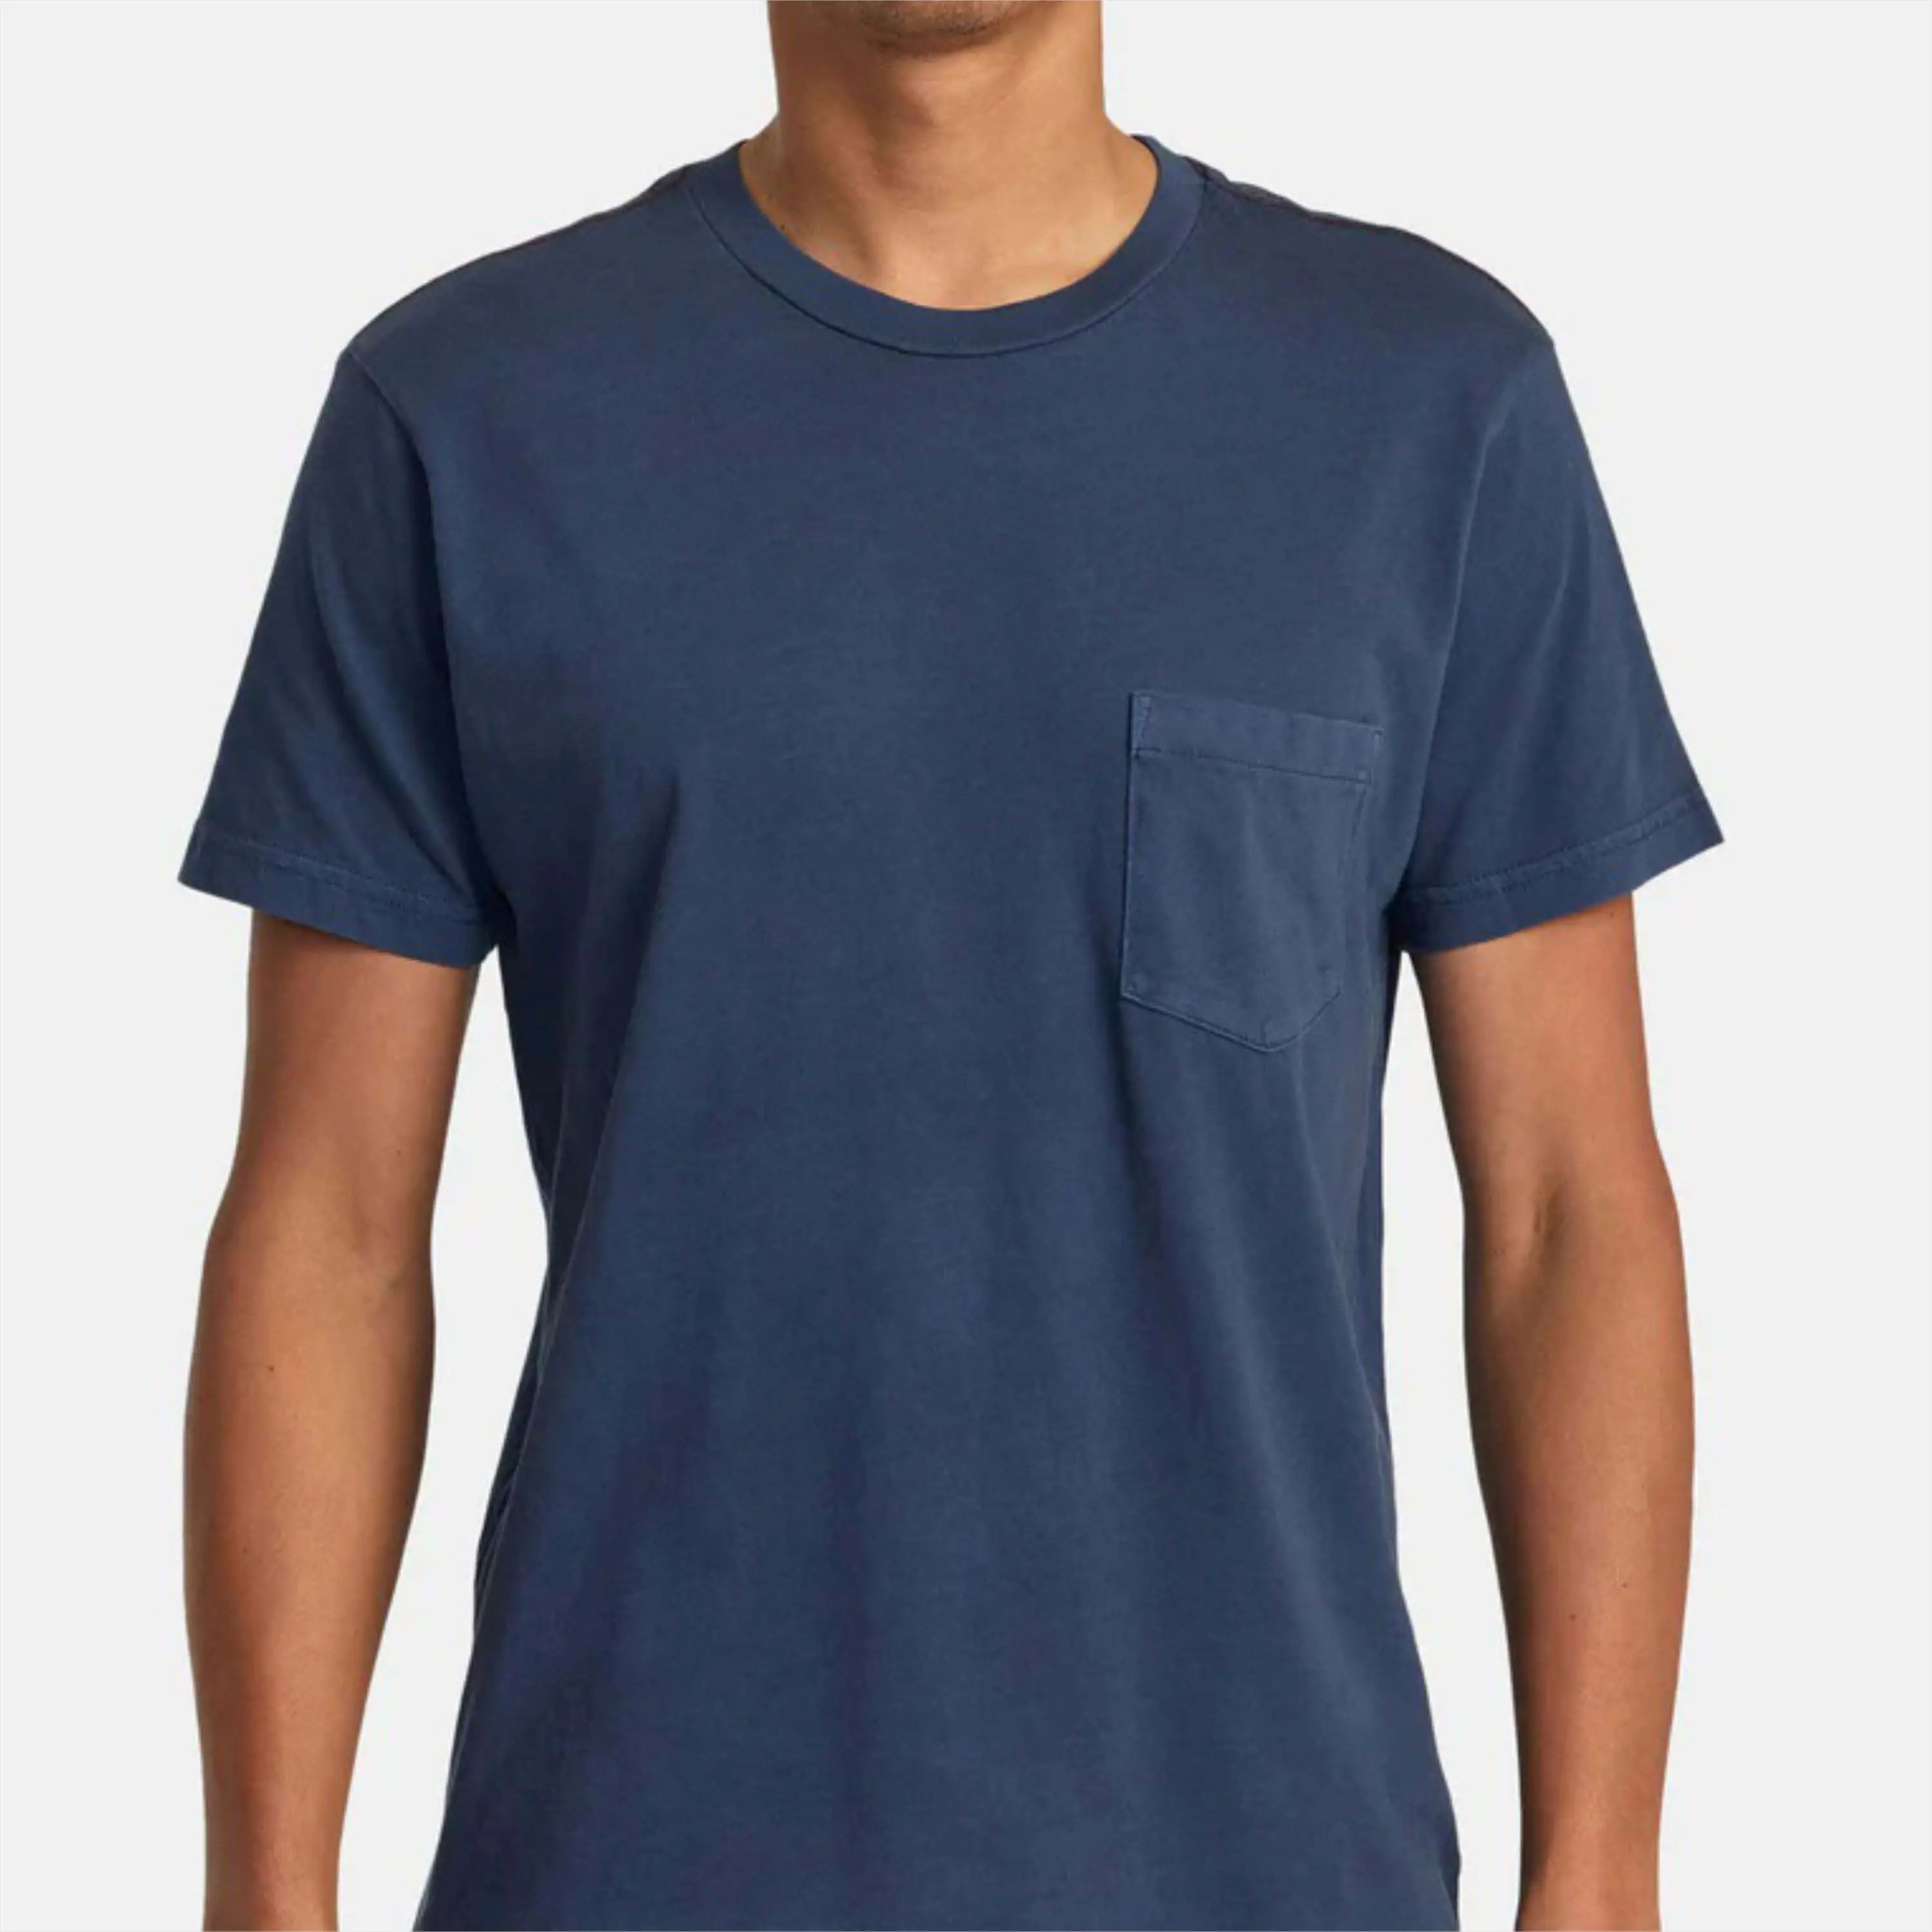 Men's Casual Pigment-Dye T-Shirt - Lightweight and Comfortable, Perfect for Everyday Wear and Stylish